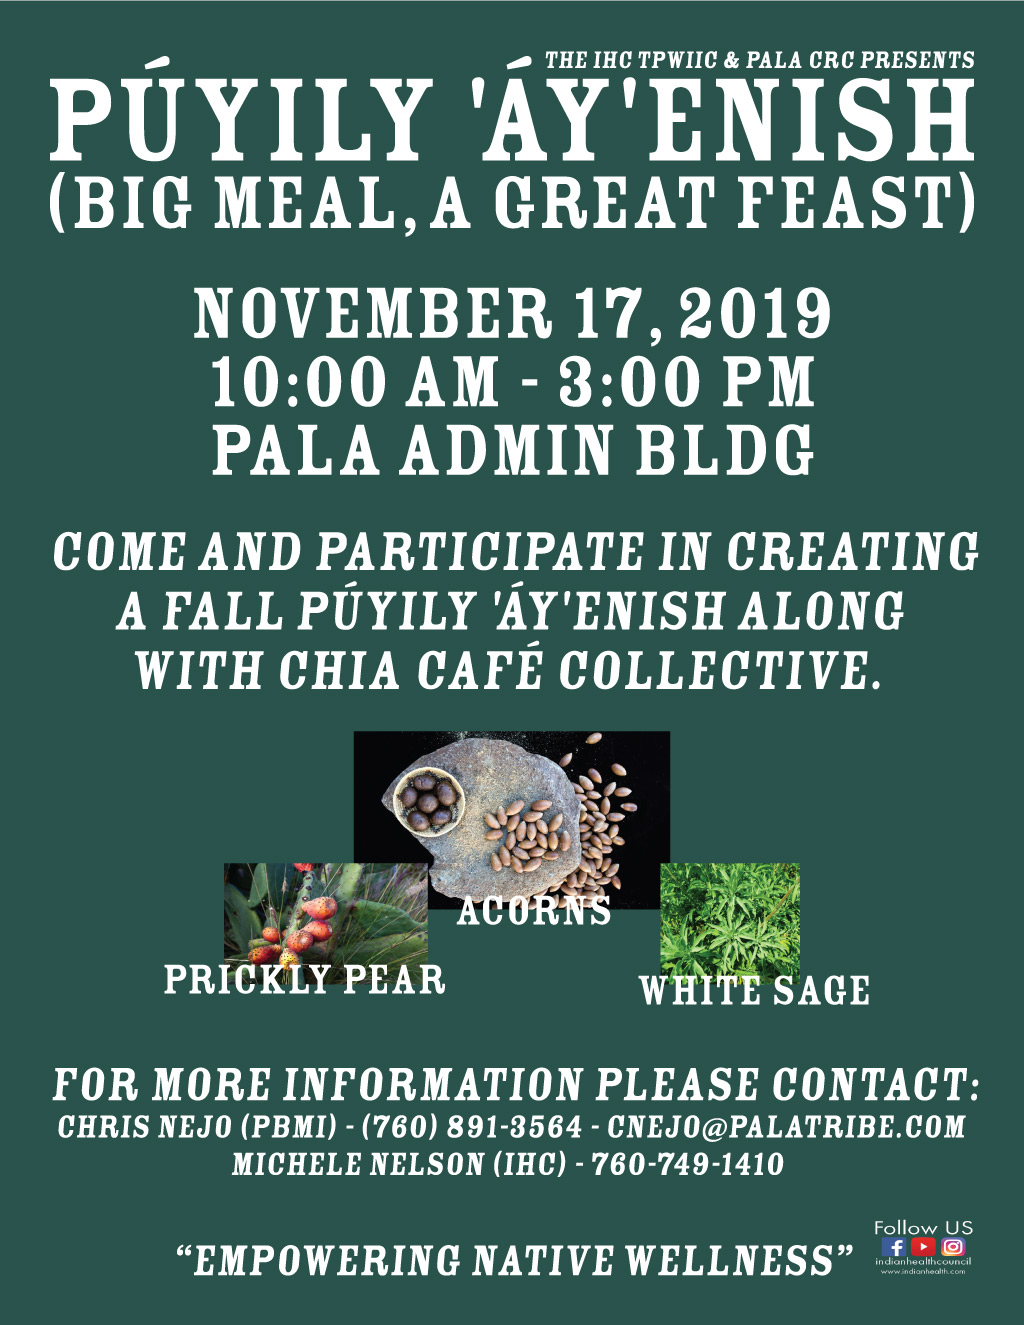 Pala Band of Mission Indians Púyily 'Áy'enish Big Meal A Great Feast2019